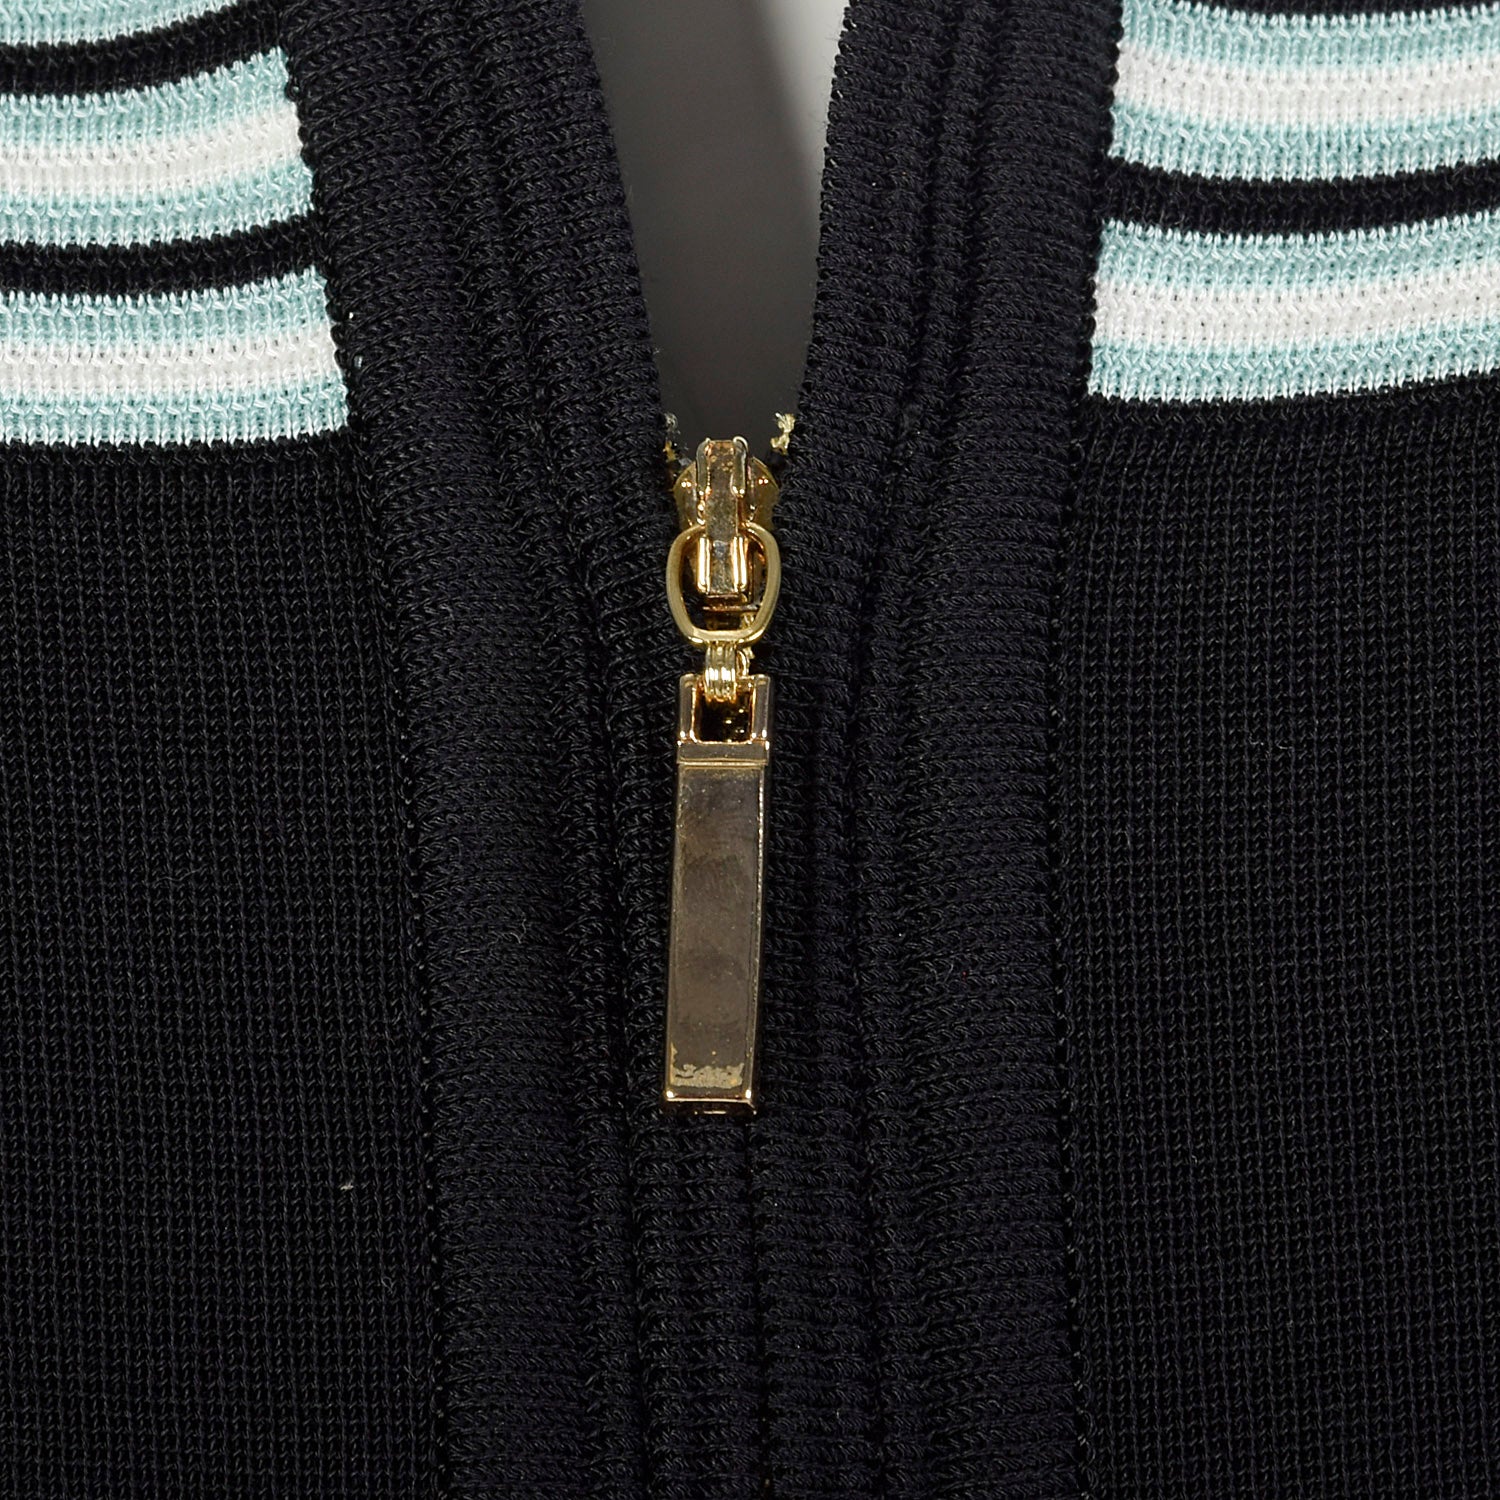 2000s Misook Black and Blue Striped Knit Shirt